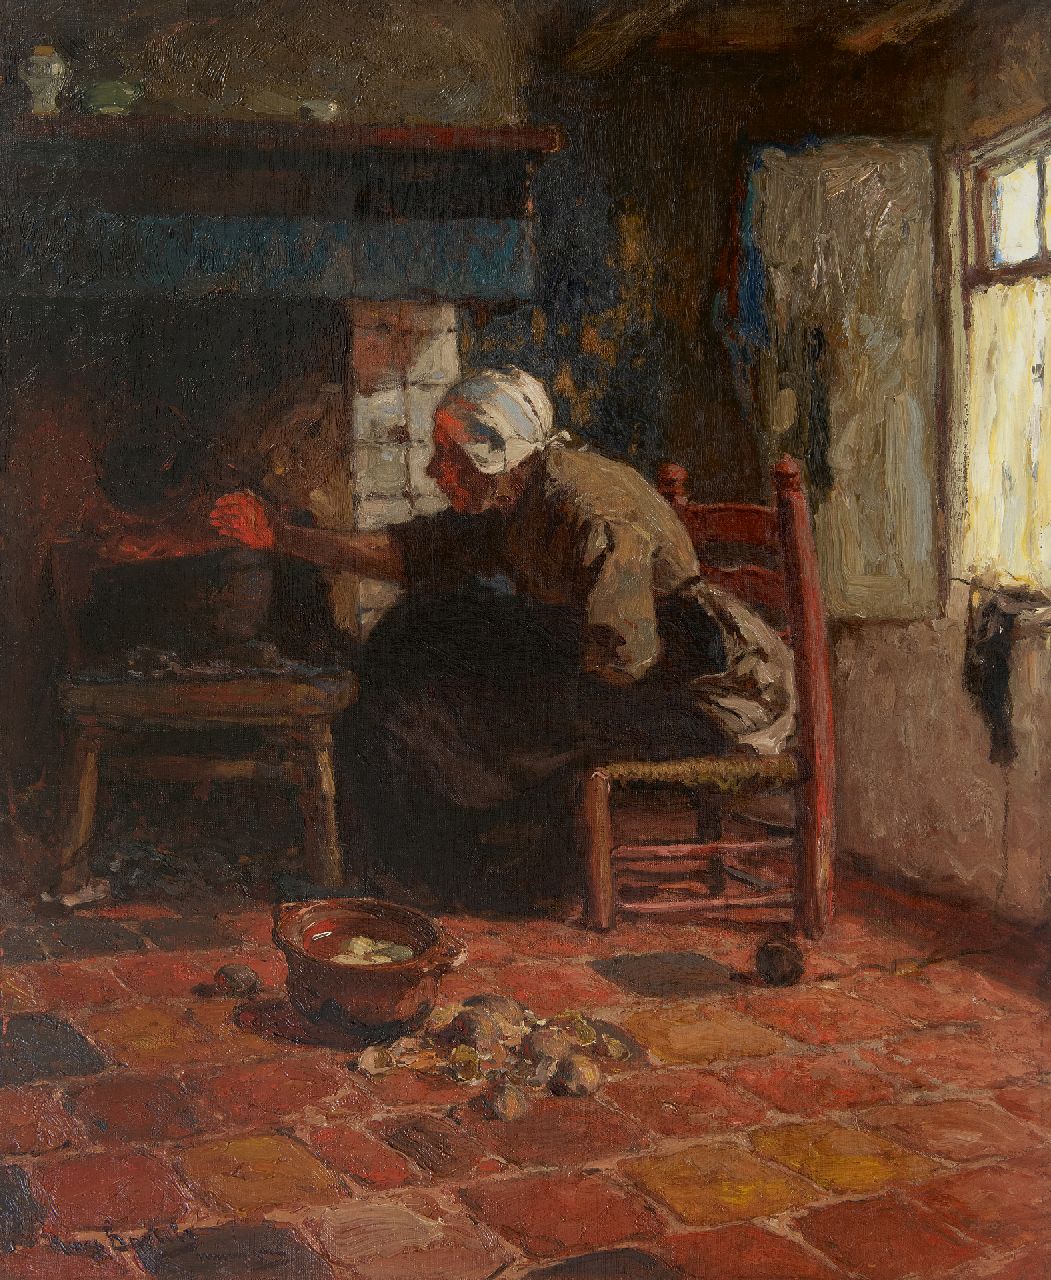 Bartels H. von | Hans von Bartels | Paintings offered for sale | A woman from Katwijk near the fireplace, oil on canvas 67.3 x 55.0 cm, signed l.l.